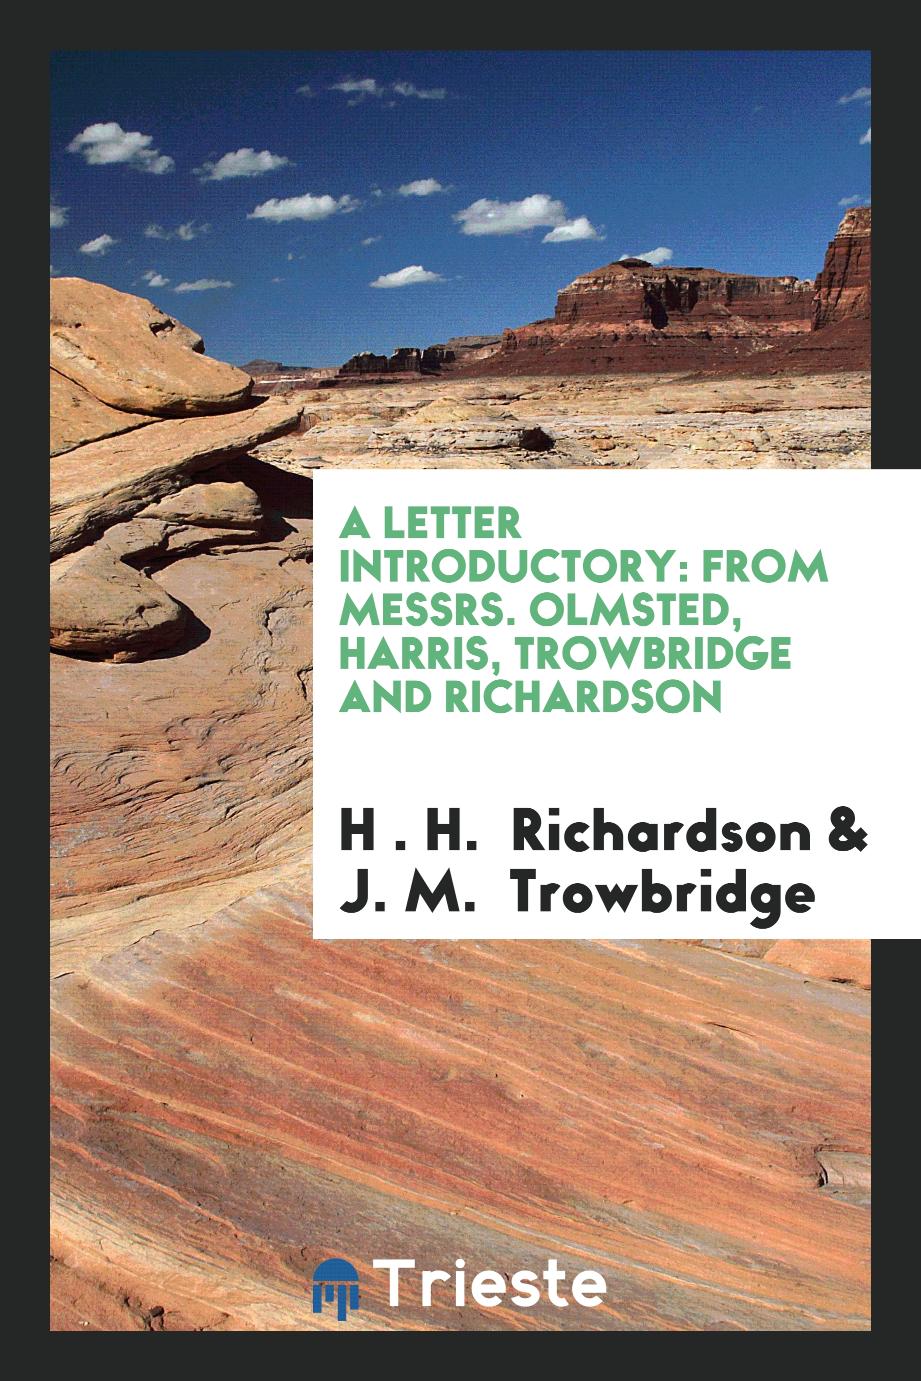 A Letter Introductory: From Messrs. Olmsted, Harris, Trowbridge and Richardson